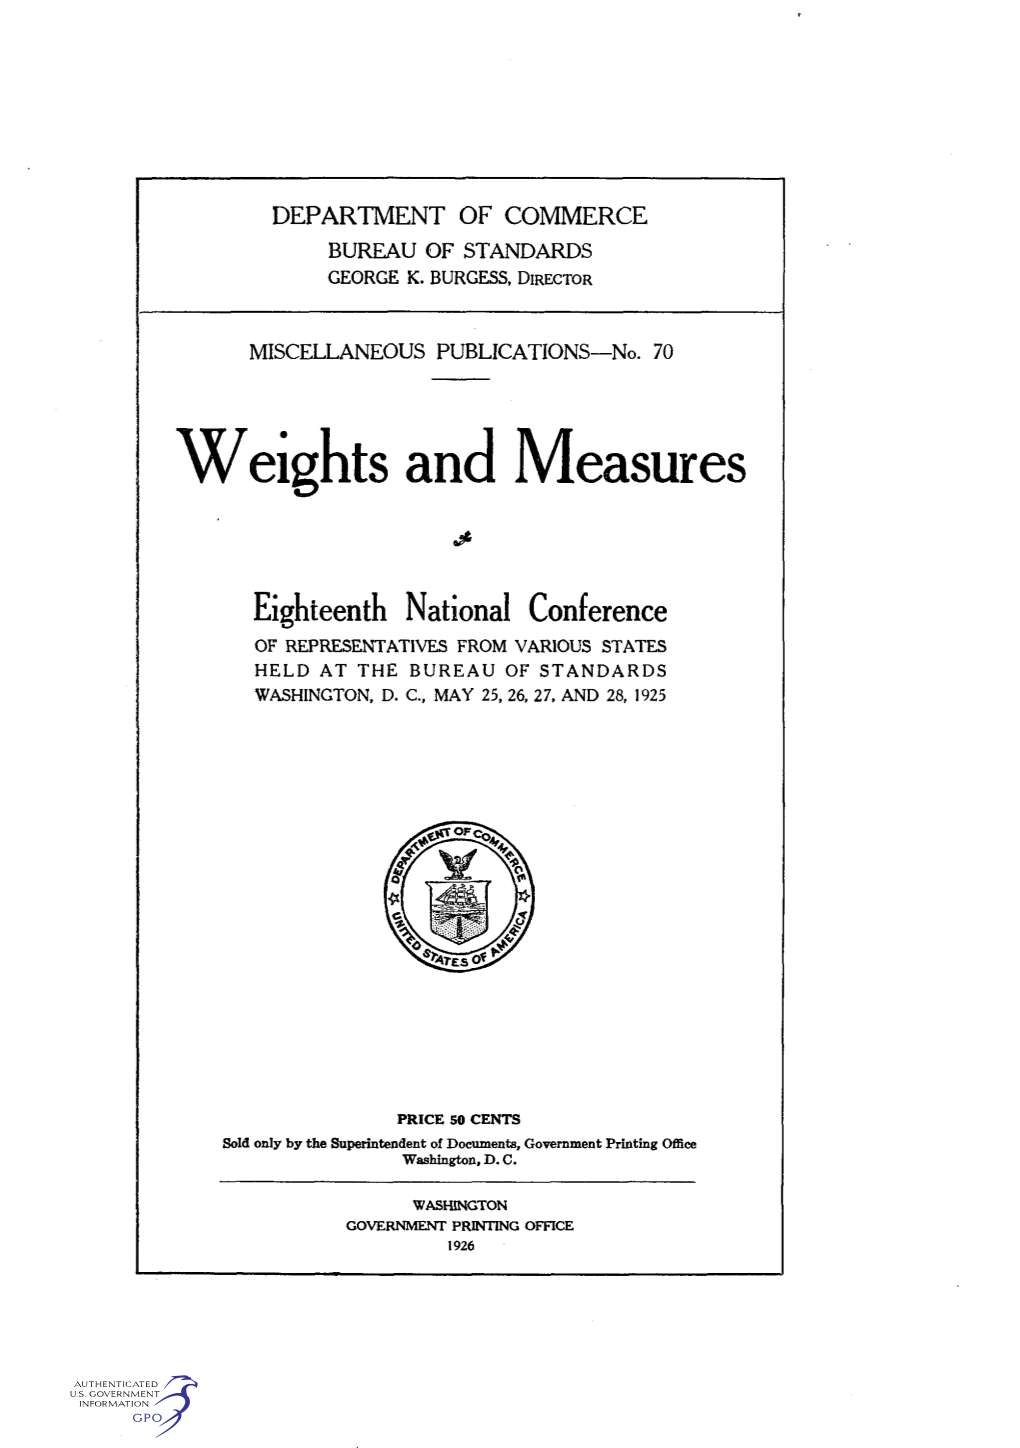 Weights and Measures Eighteenth National Conference